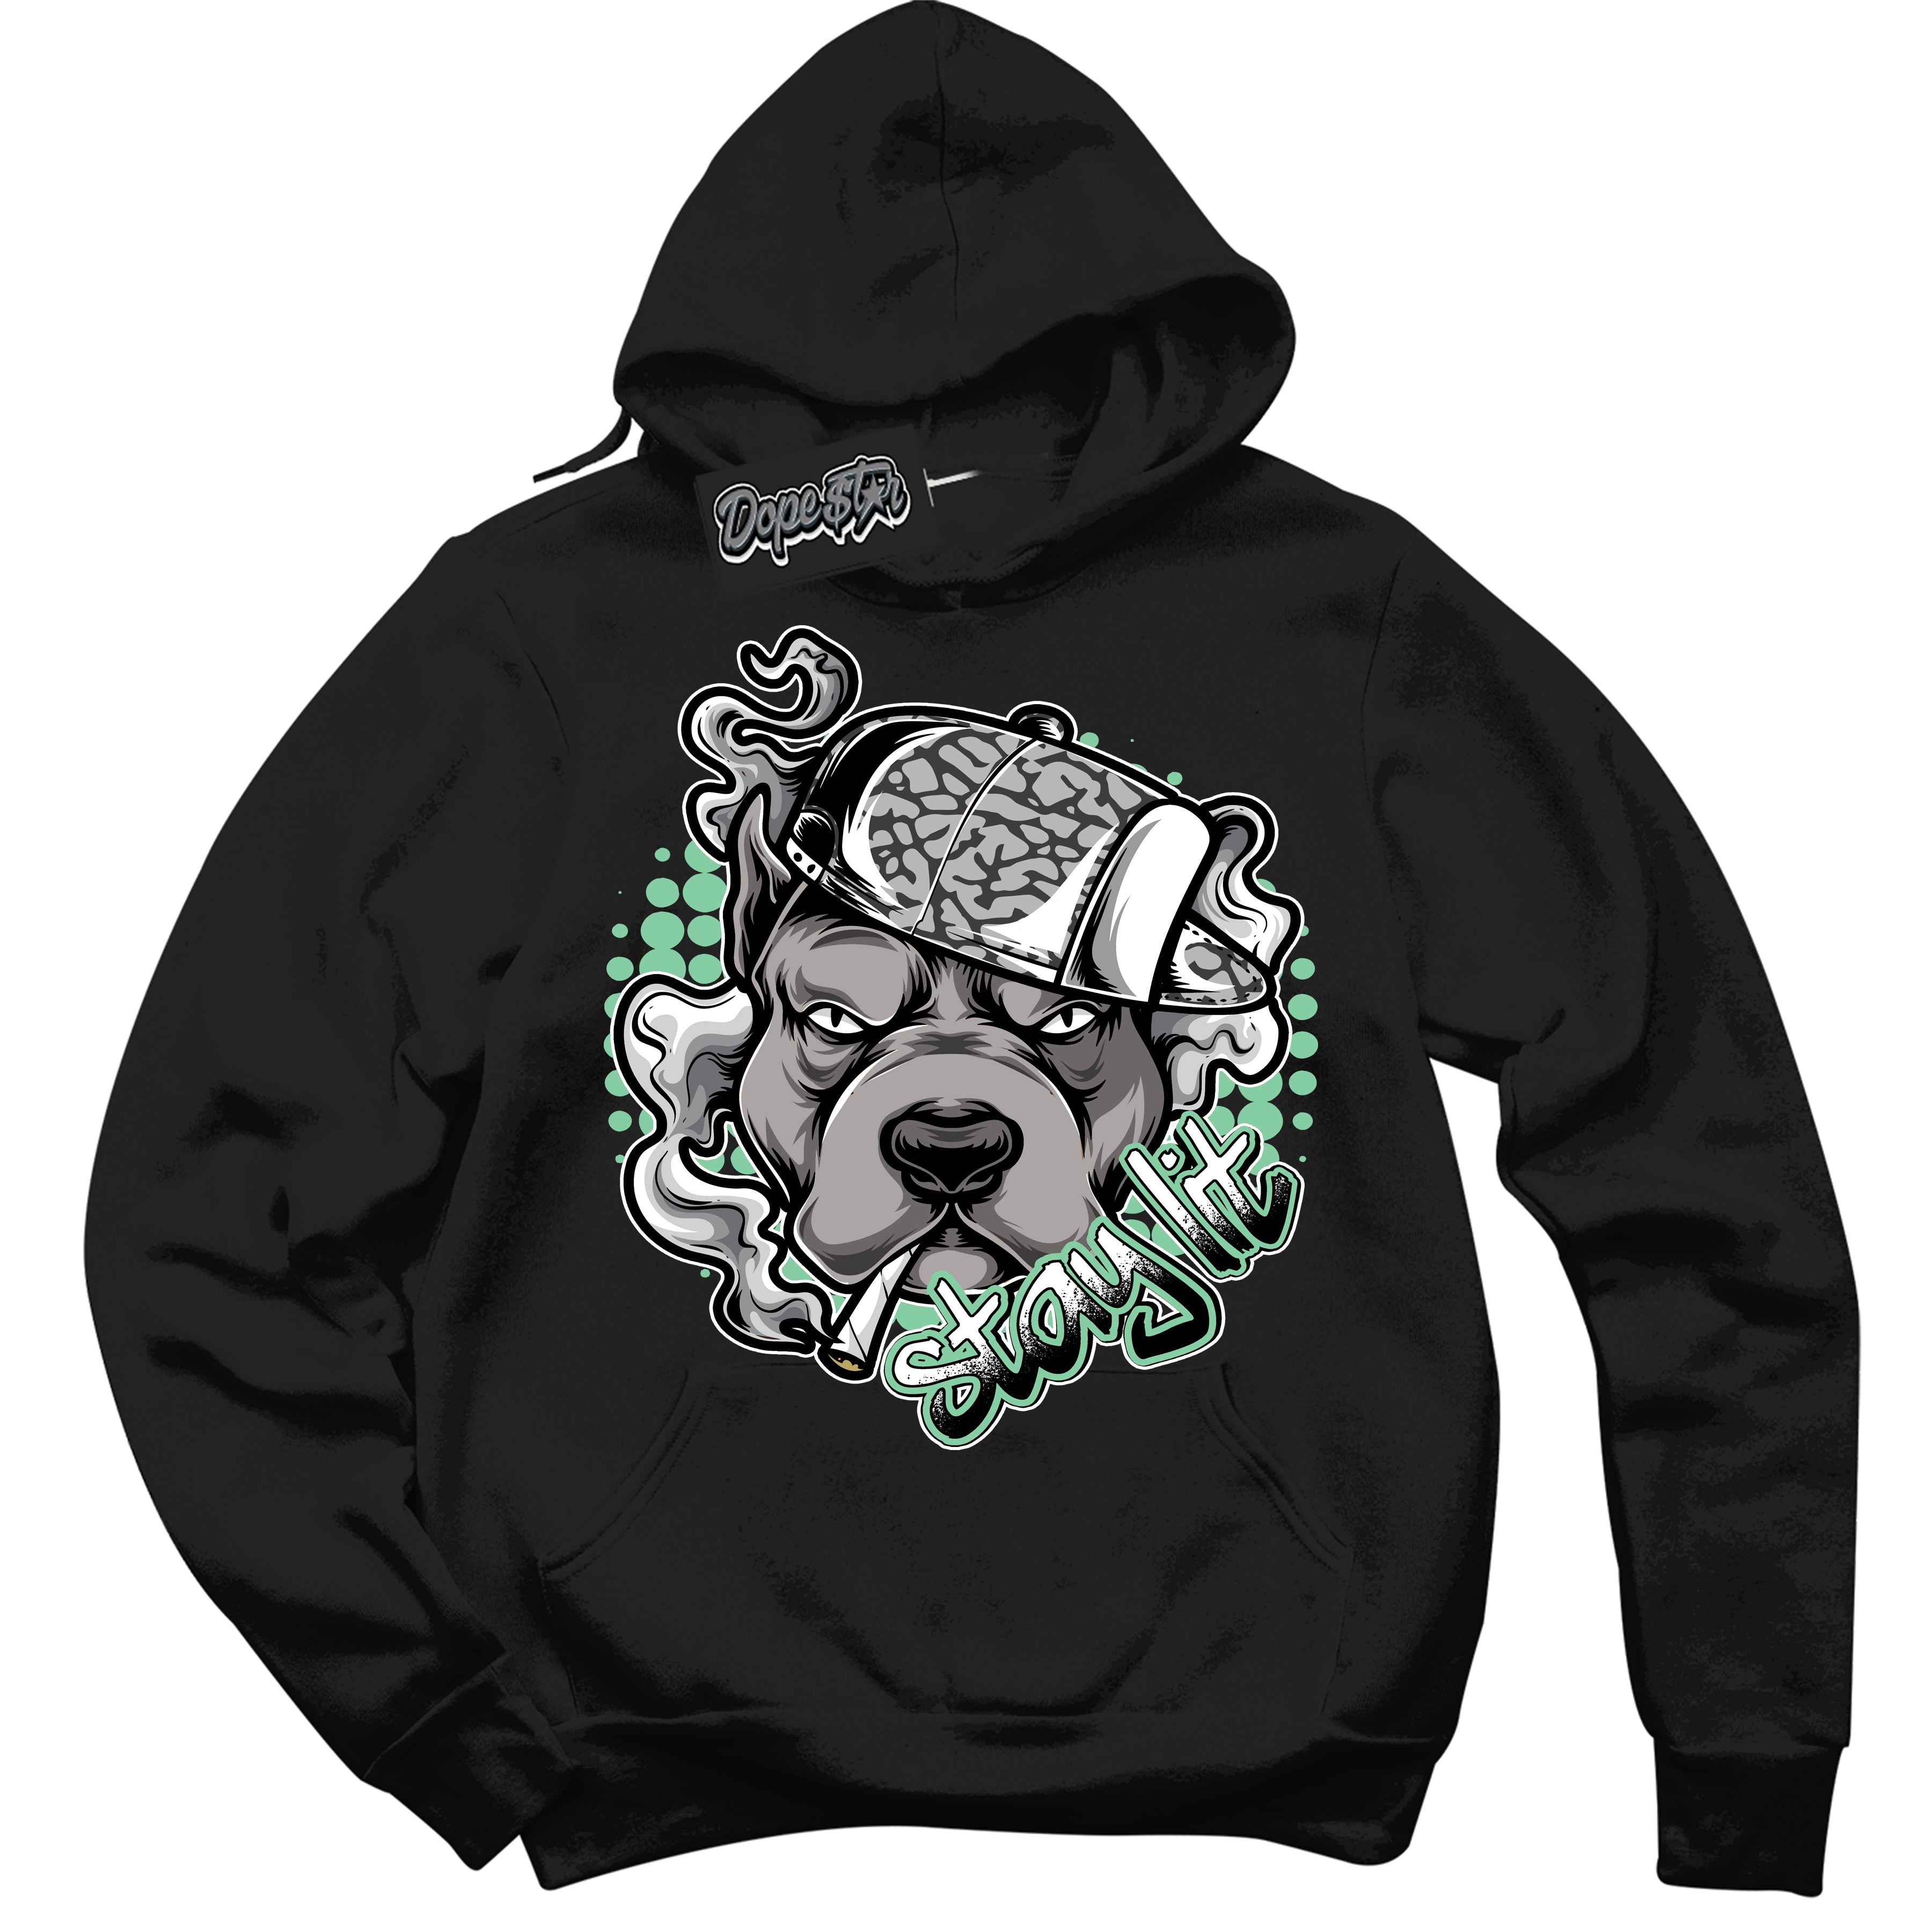 Cool Black Graphic DopeStar Hoodie with “ Stay Lit “ print, that perfectly matches Green Glow 3S sneakers